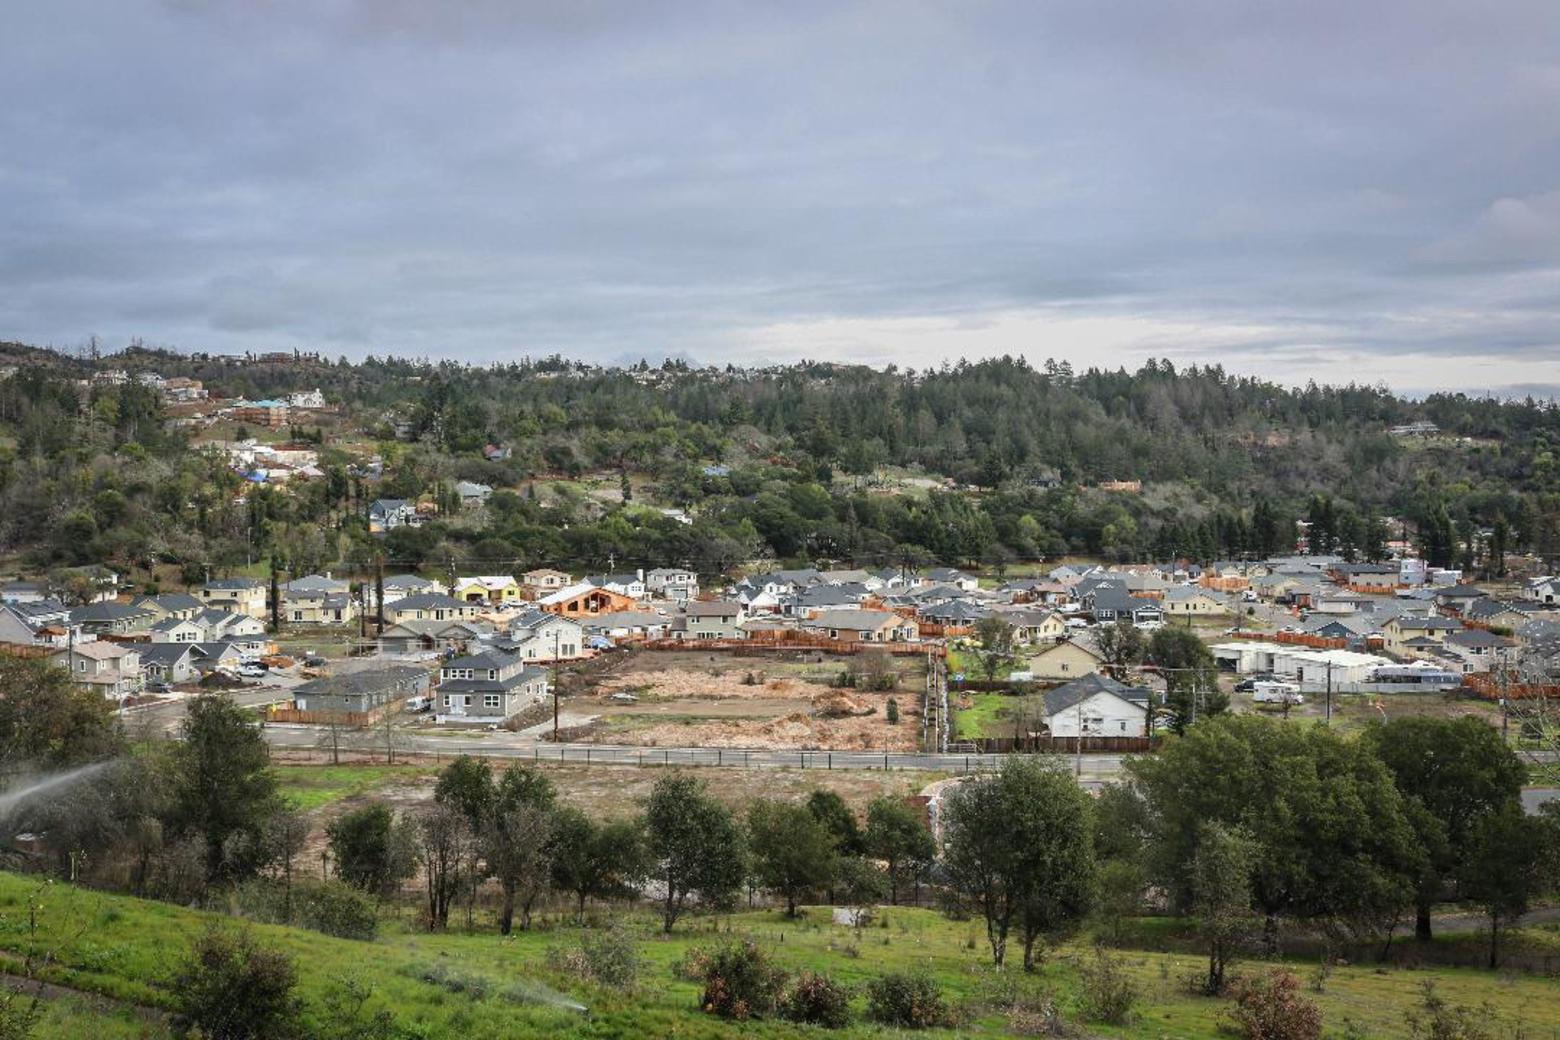 A neighborhood in Santa Rosa, California rebuilds after the Tubbs Fire. Issues of co-existence with nature take on many different forms in regions of the US where humans dominate the landscape. Pondering free-ranging wildlife and unbroken wildlands have introduced Castro-Root to a different context in thinking about the ecological health of big landscapes.